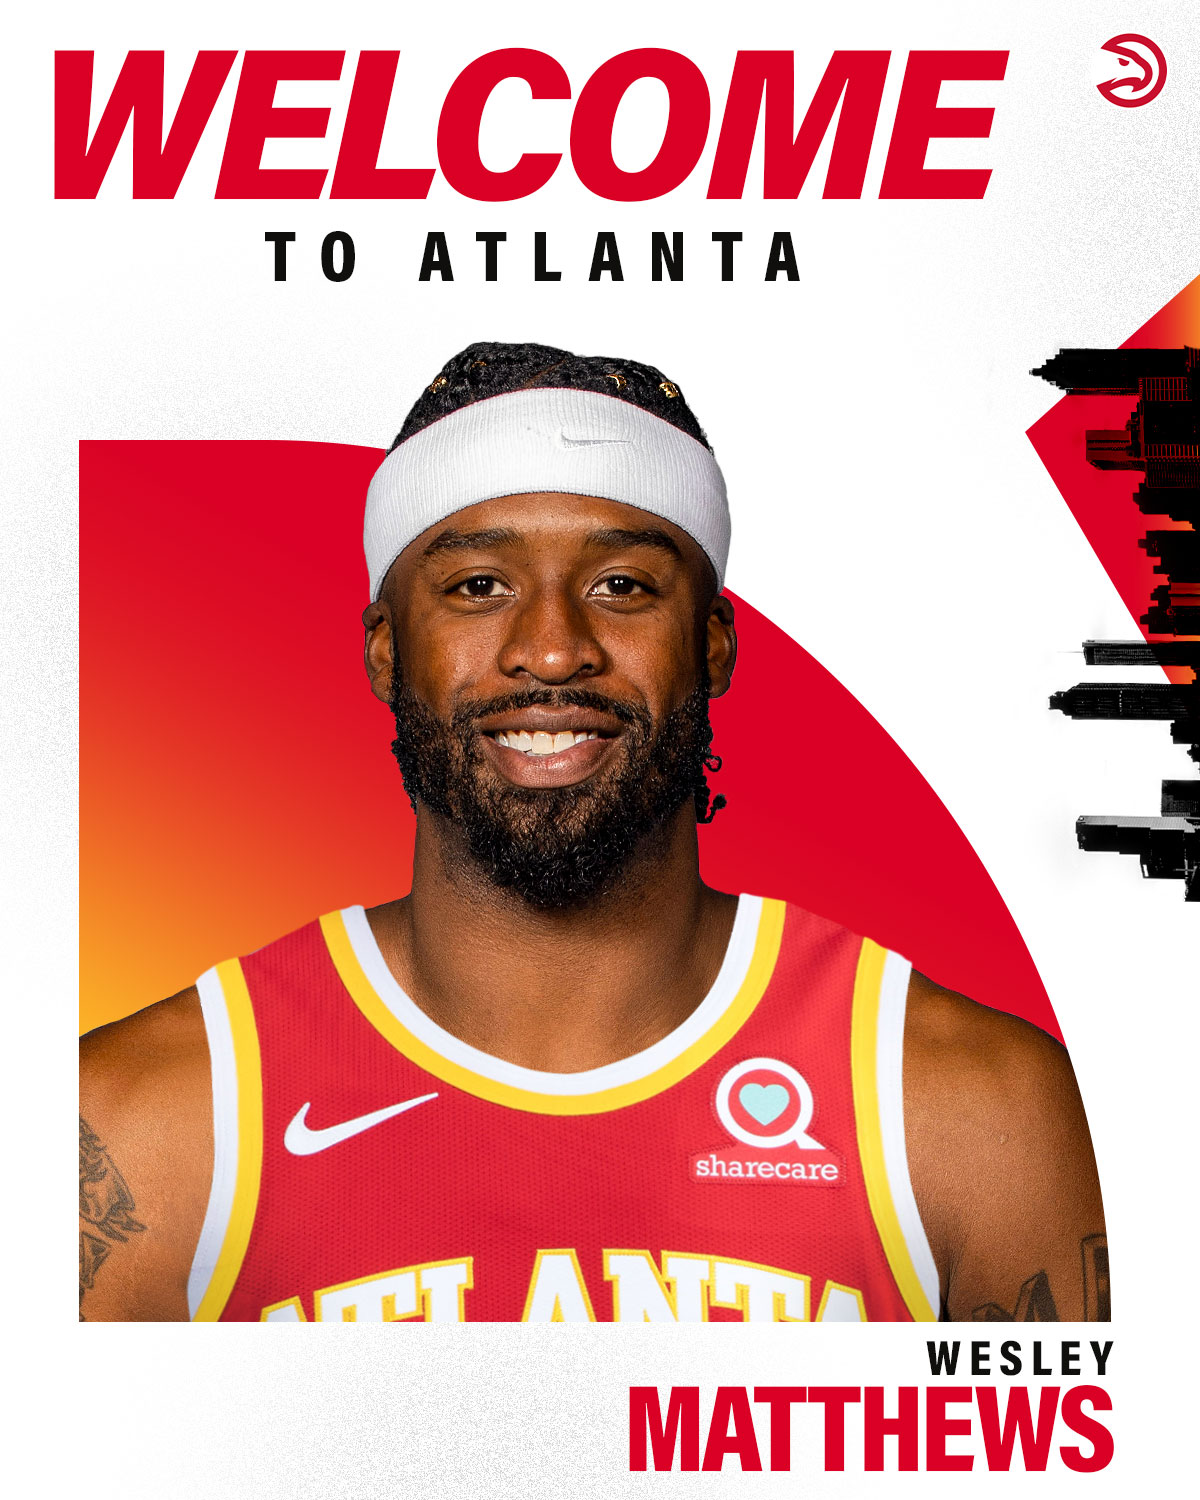 Atlanta Hawks on X: "We have signed guard Wesley Matthews. Welcome to the  🅰️, Wesley! https://t.co/mcuEBYwU6a" / X